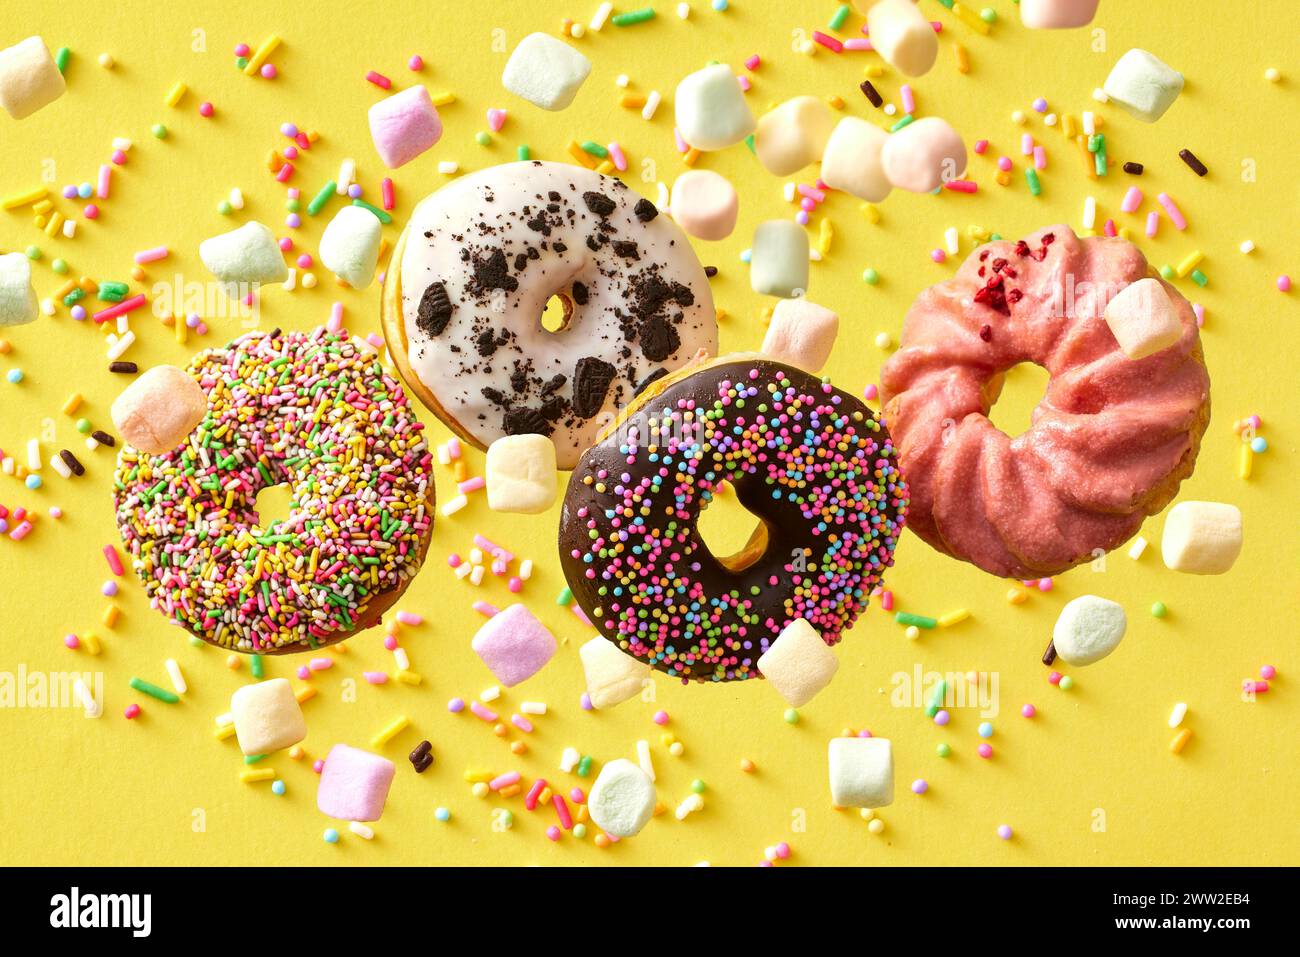 Four donuts with sprinkles on a yellow background Stock Photo